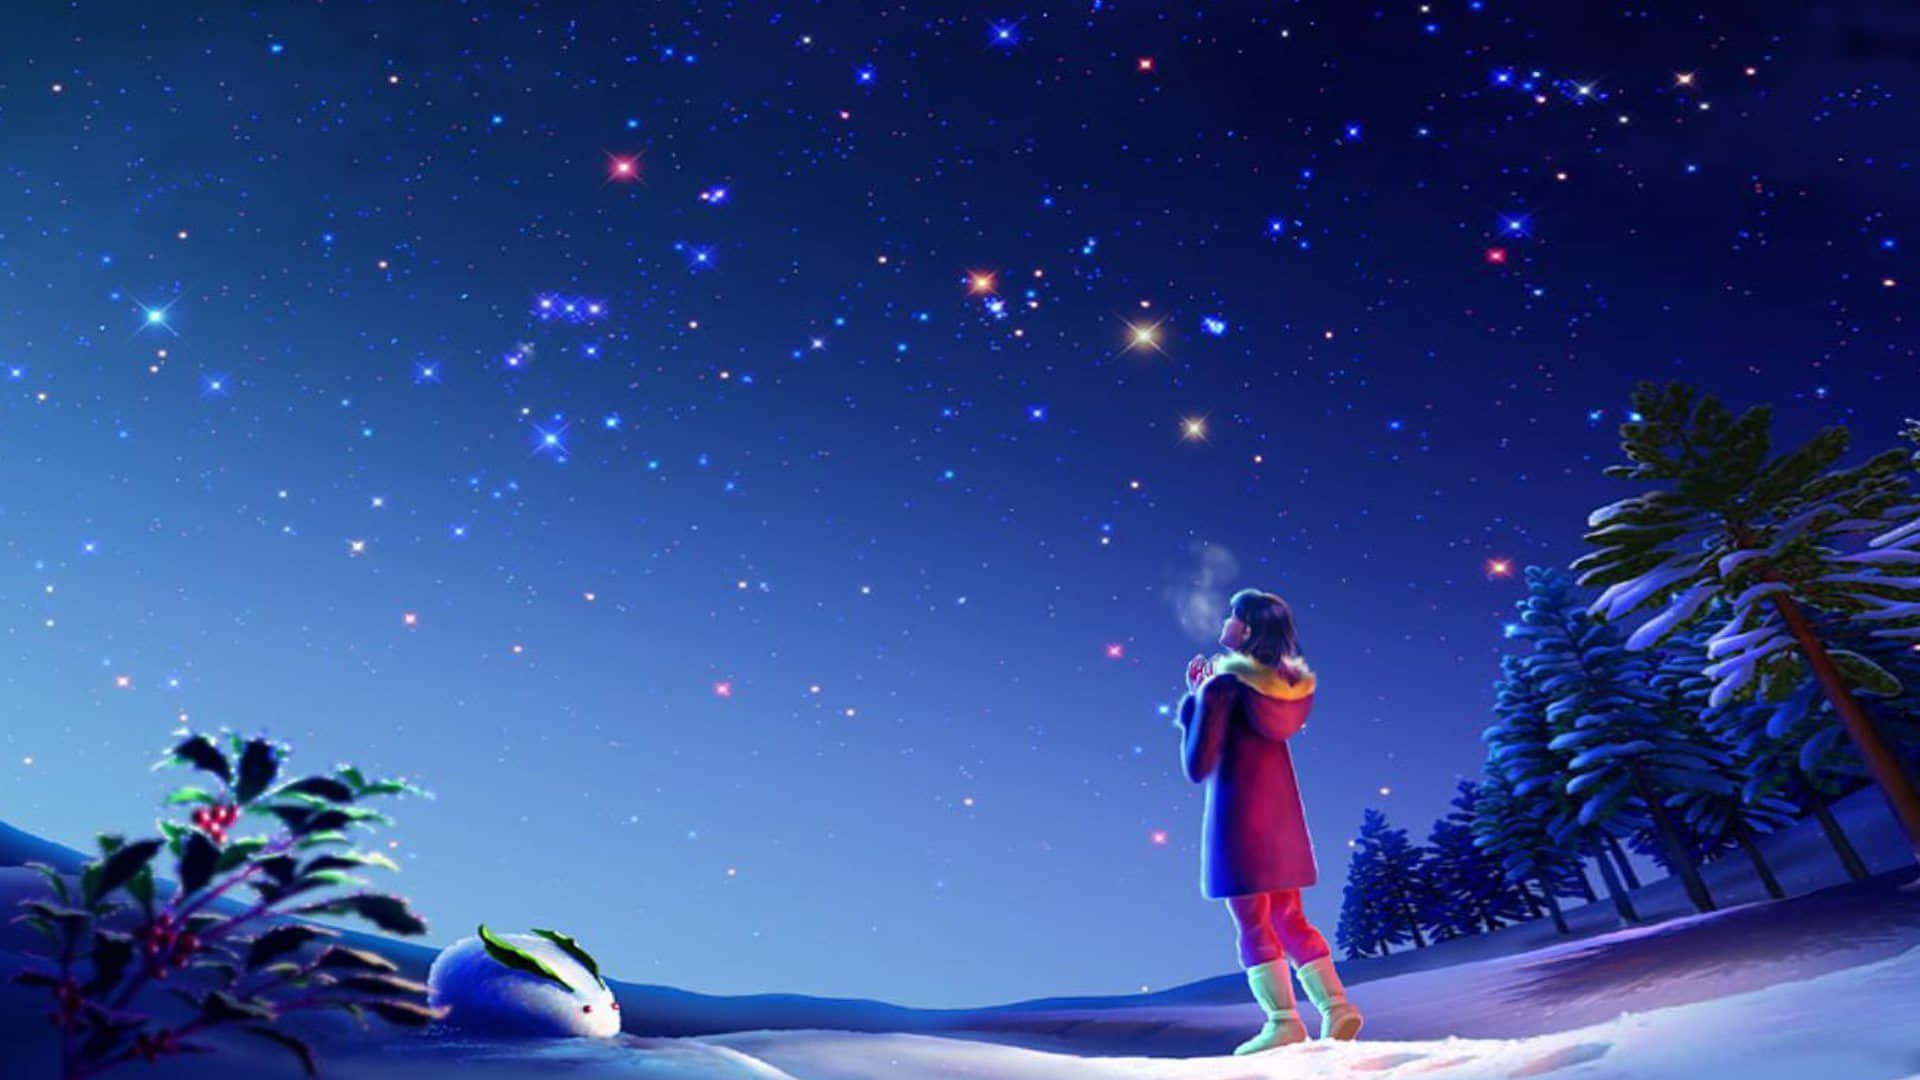 Magical Night Sky With Girl Looking At Sky Wallpaper